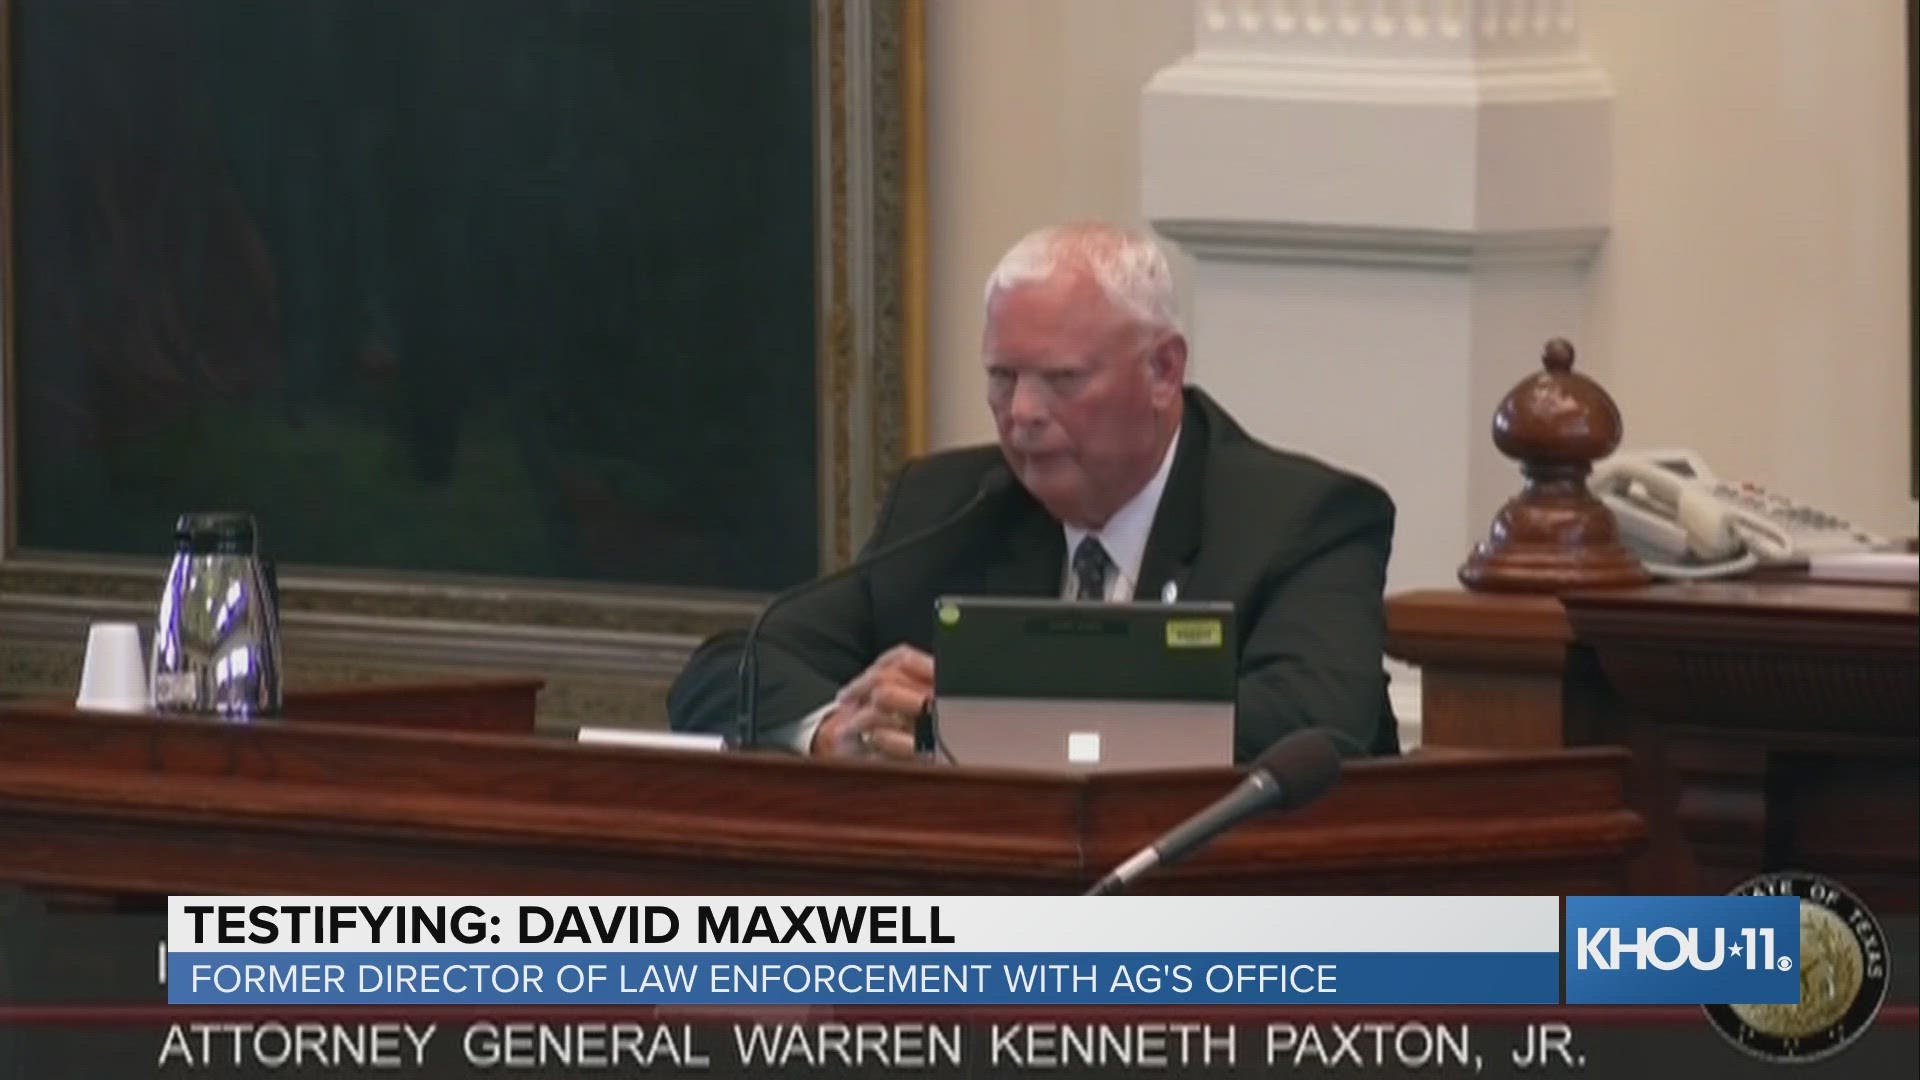 David Maxwell is a former Texas Ranger who joined Paxton's staff. He said he told Paxton that Paul was "running a ponzi scheme" and Paxton should stay away from him.